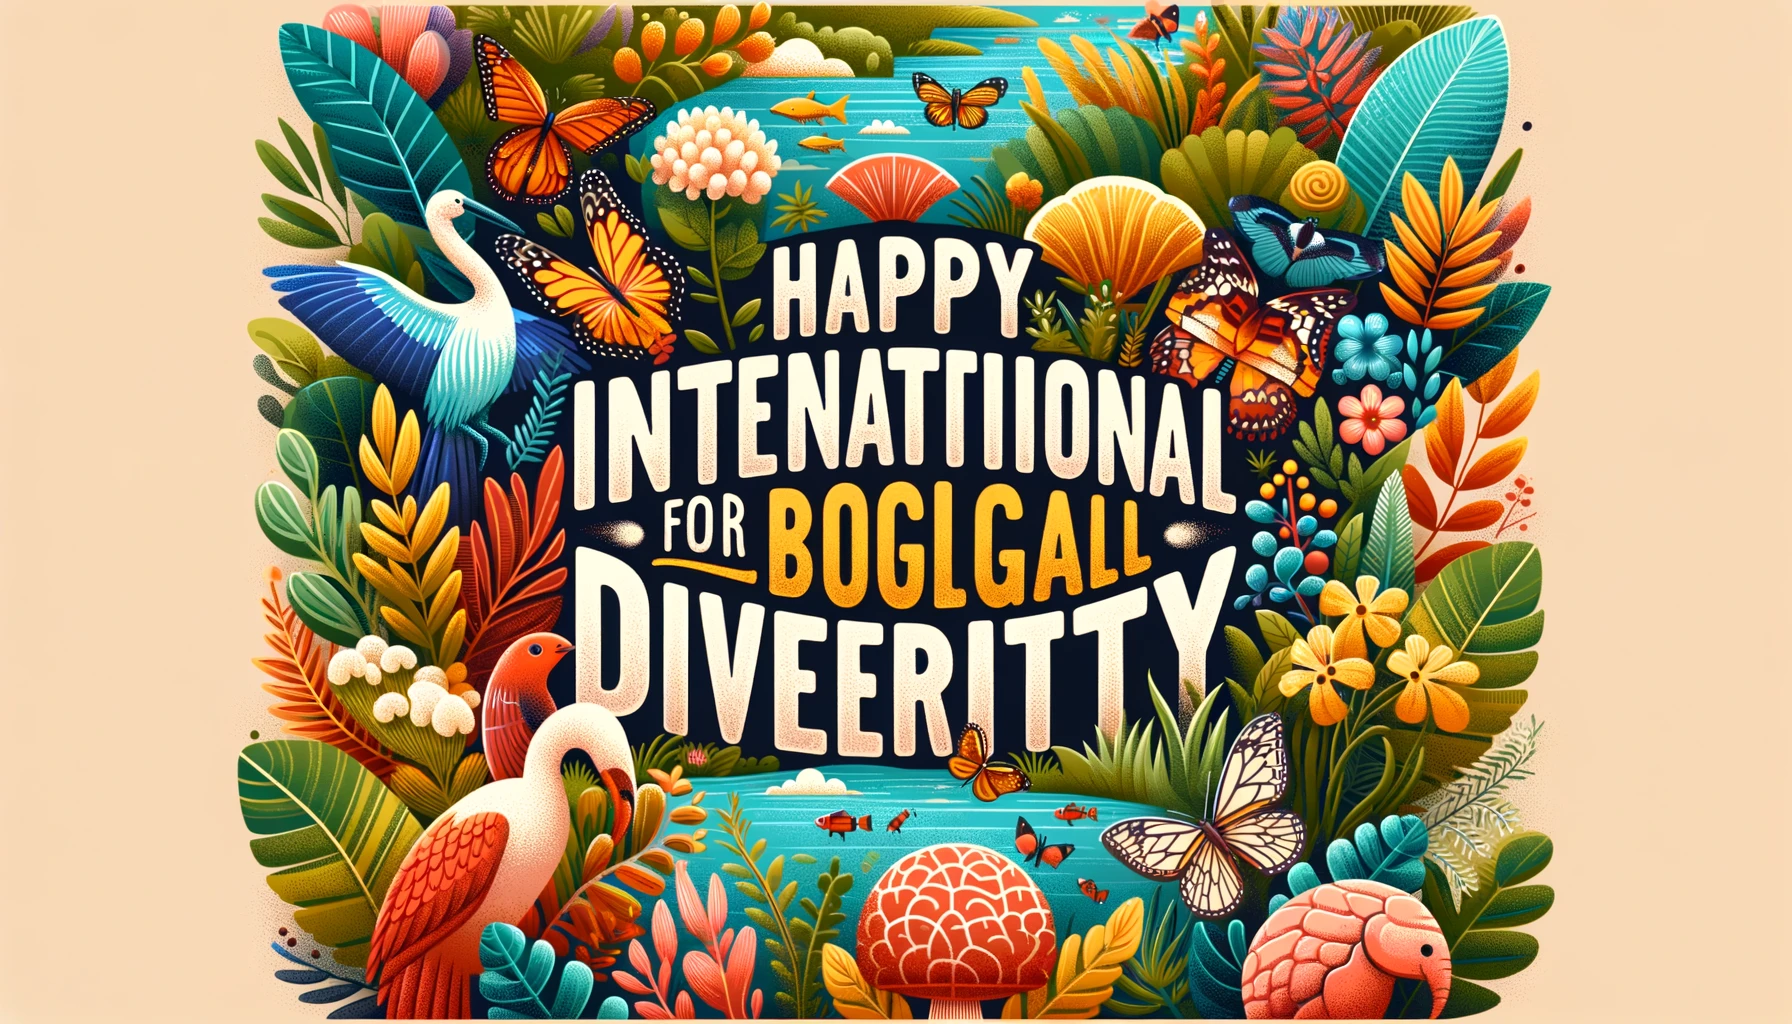 Beautiful Messages for International Day for Biological Diversity